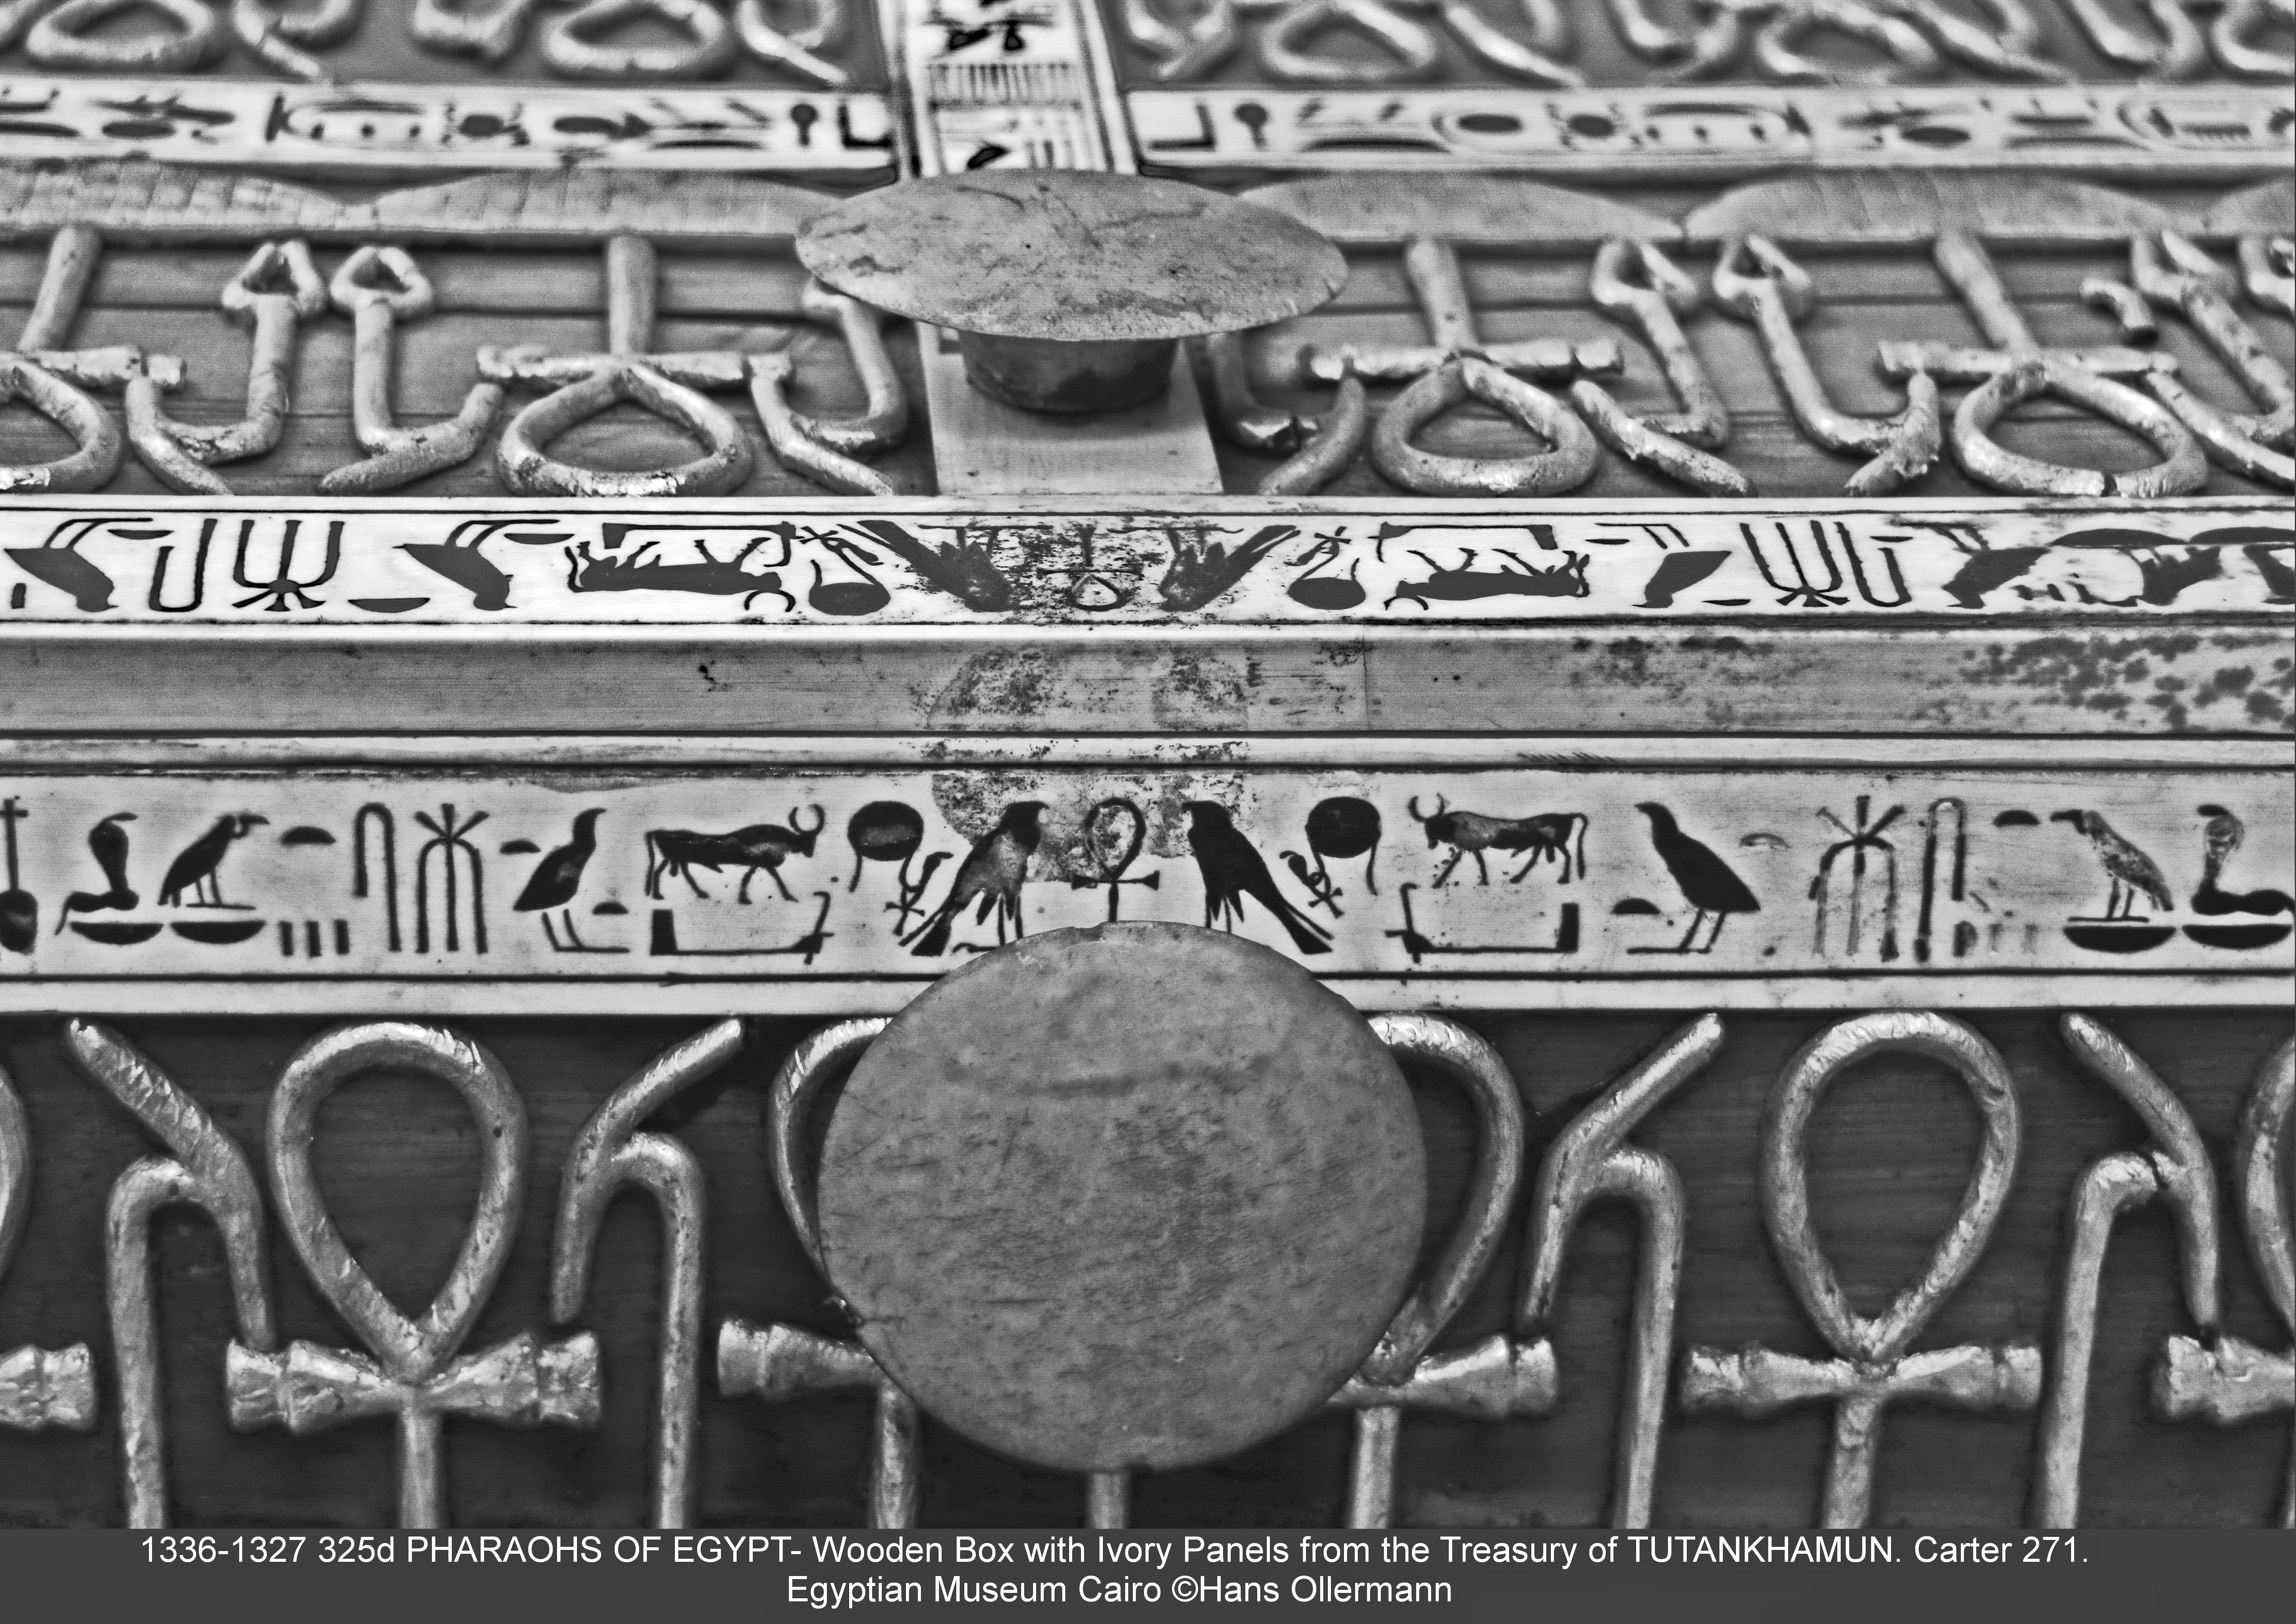 Wooden Box with Ivory Panels from the Treasury of TUTANKHAMUN, detail. Carter 271. Egyptian Museum Cairo :copyright:Hans Ollermann Carter 271. Relevant Burton photo’s, as found in Howard Carter Archives in the Griffith Institute at Oxford University, are 987,987a-c,1083,1094,1094a,1095,1109,1174-1175a,1765,1827,1961-1962. JE 61458,62617,62344. Exh. 451, 1252, 1676.